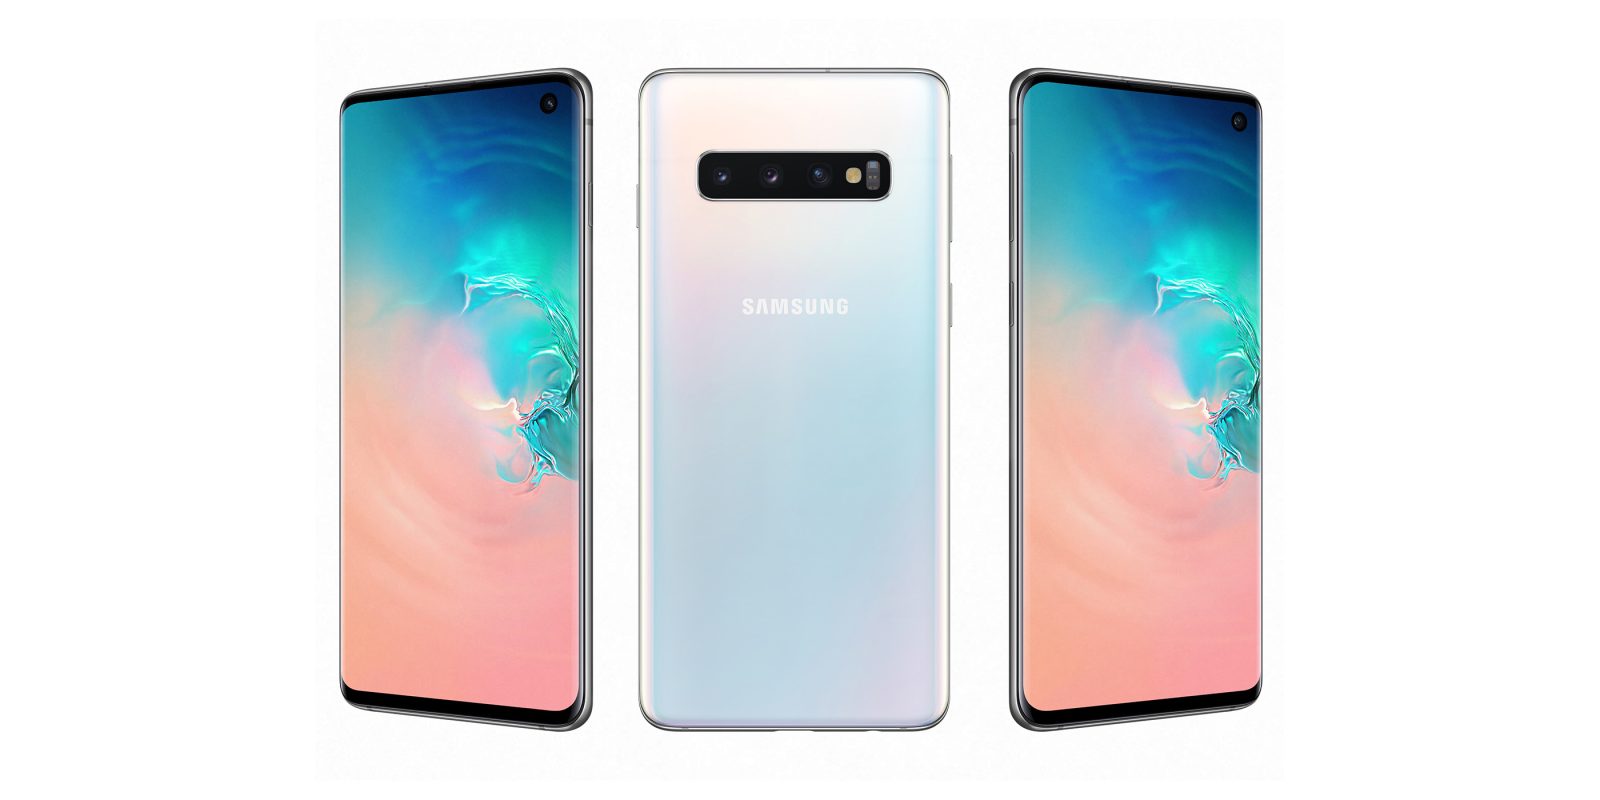 samsung galaxy s10 tidbits bixby button remapping rip notification led colors more - new fortnite galaxy s10